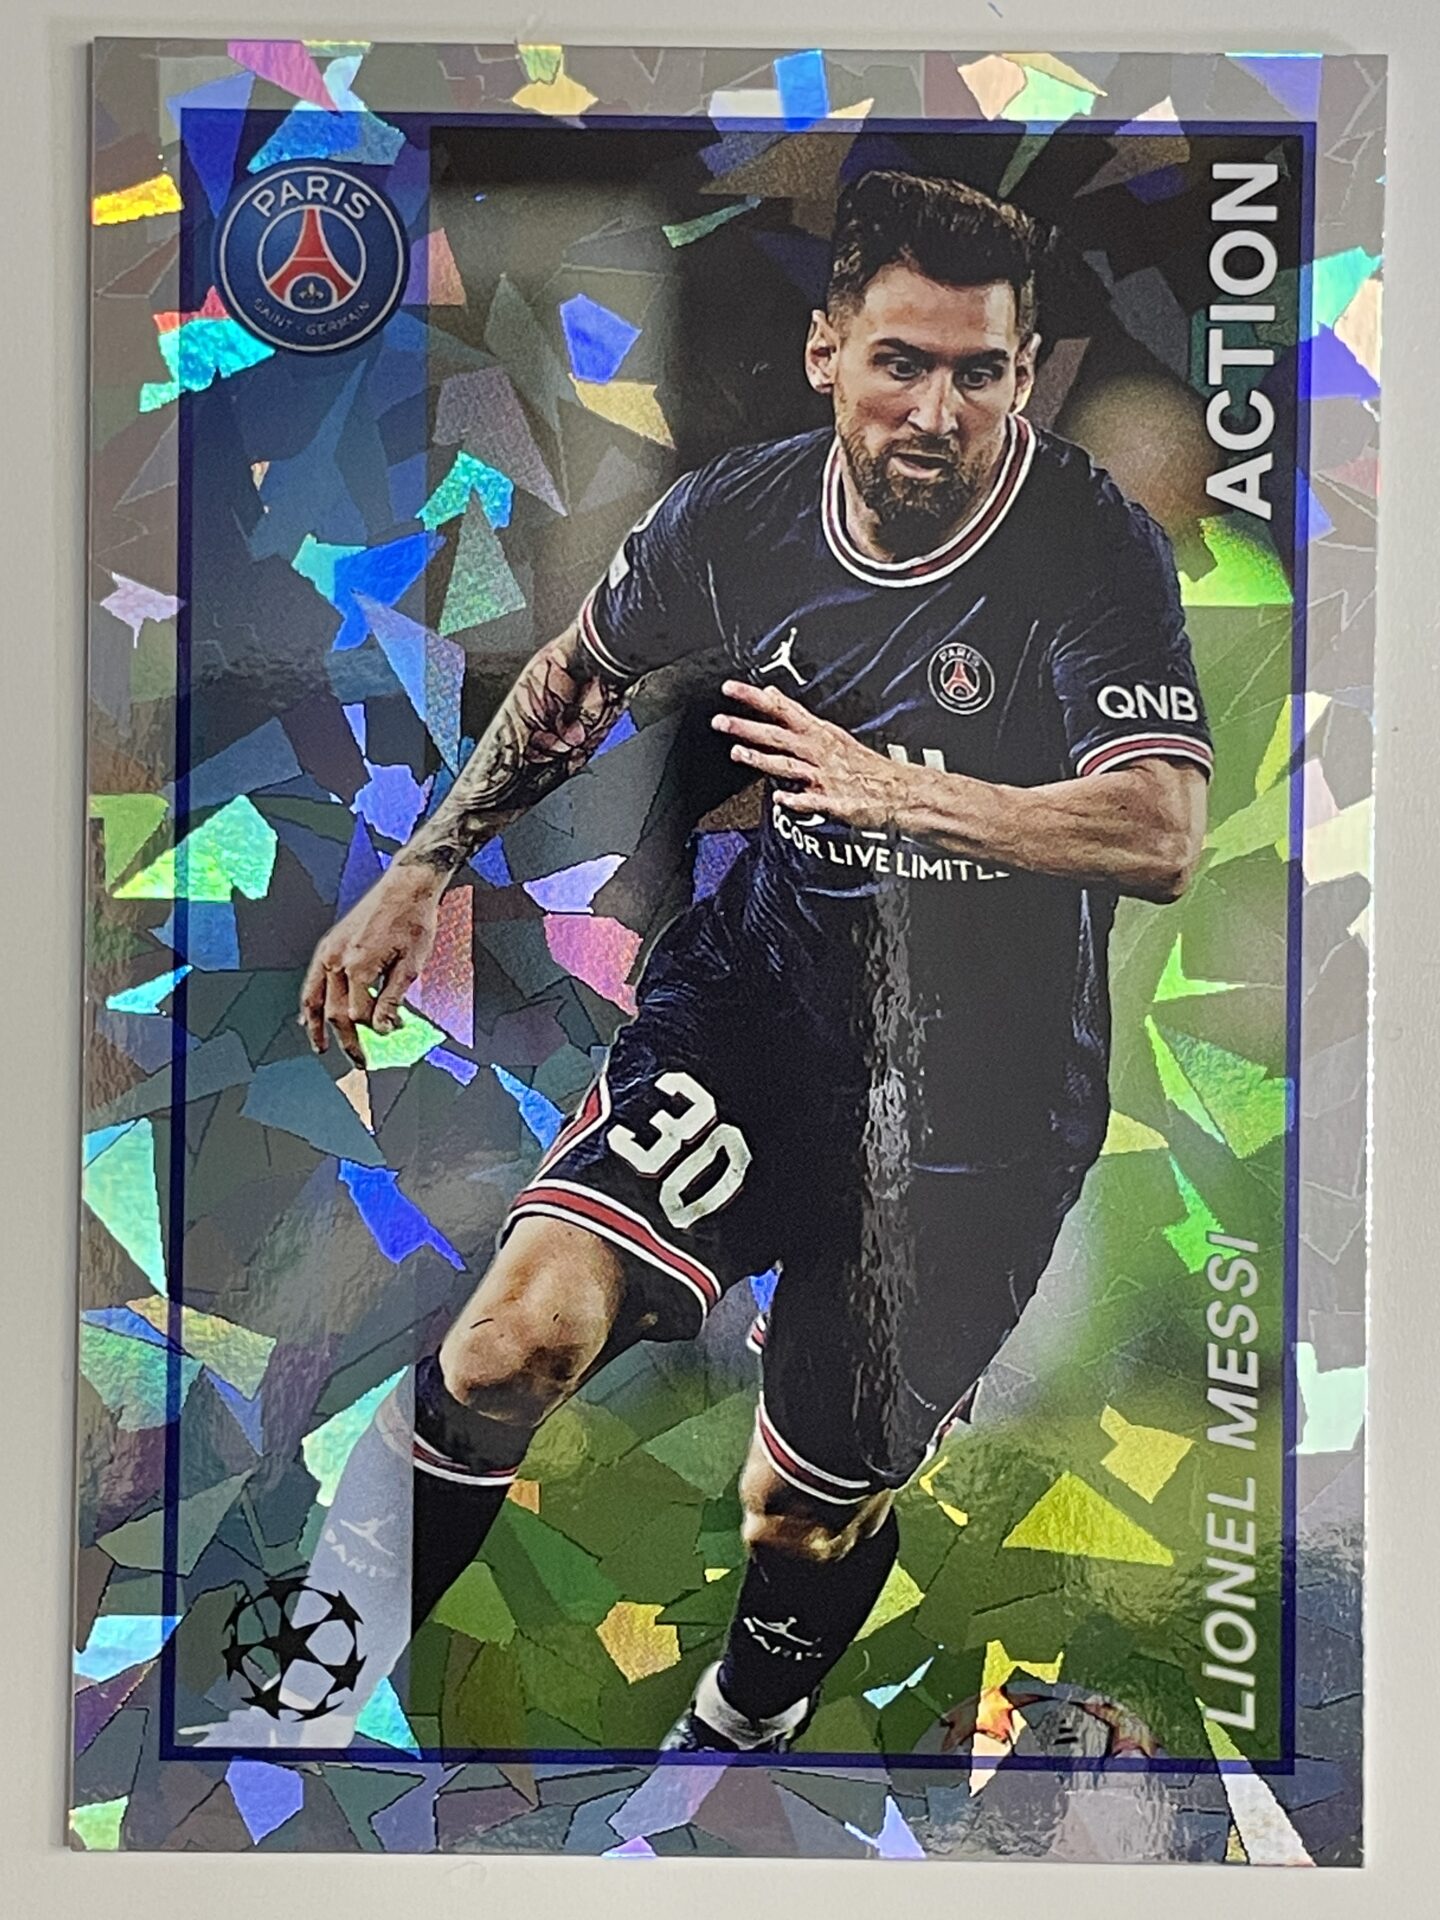 La Pulga Lionel Messi Topps Merlin 97 Heritage Champions League Action Card